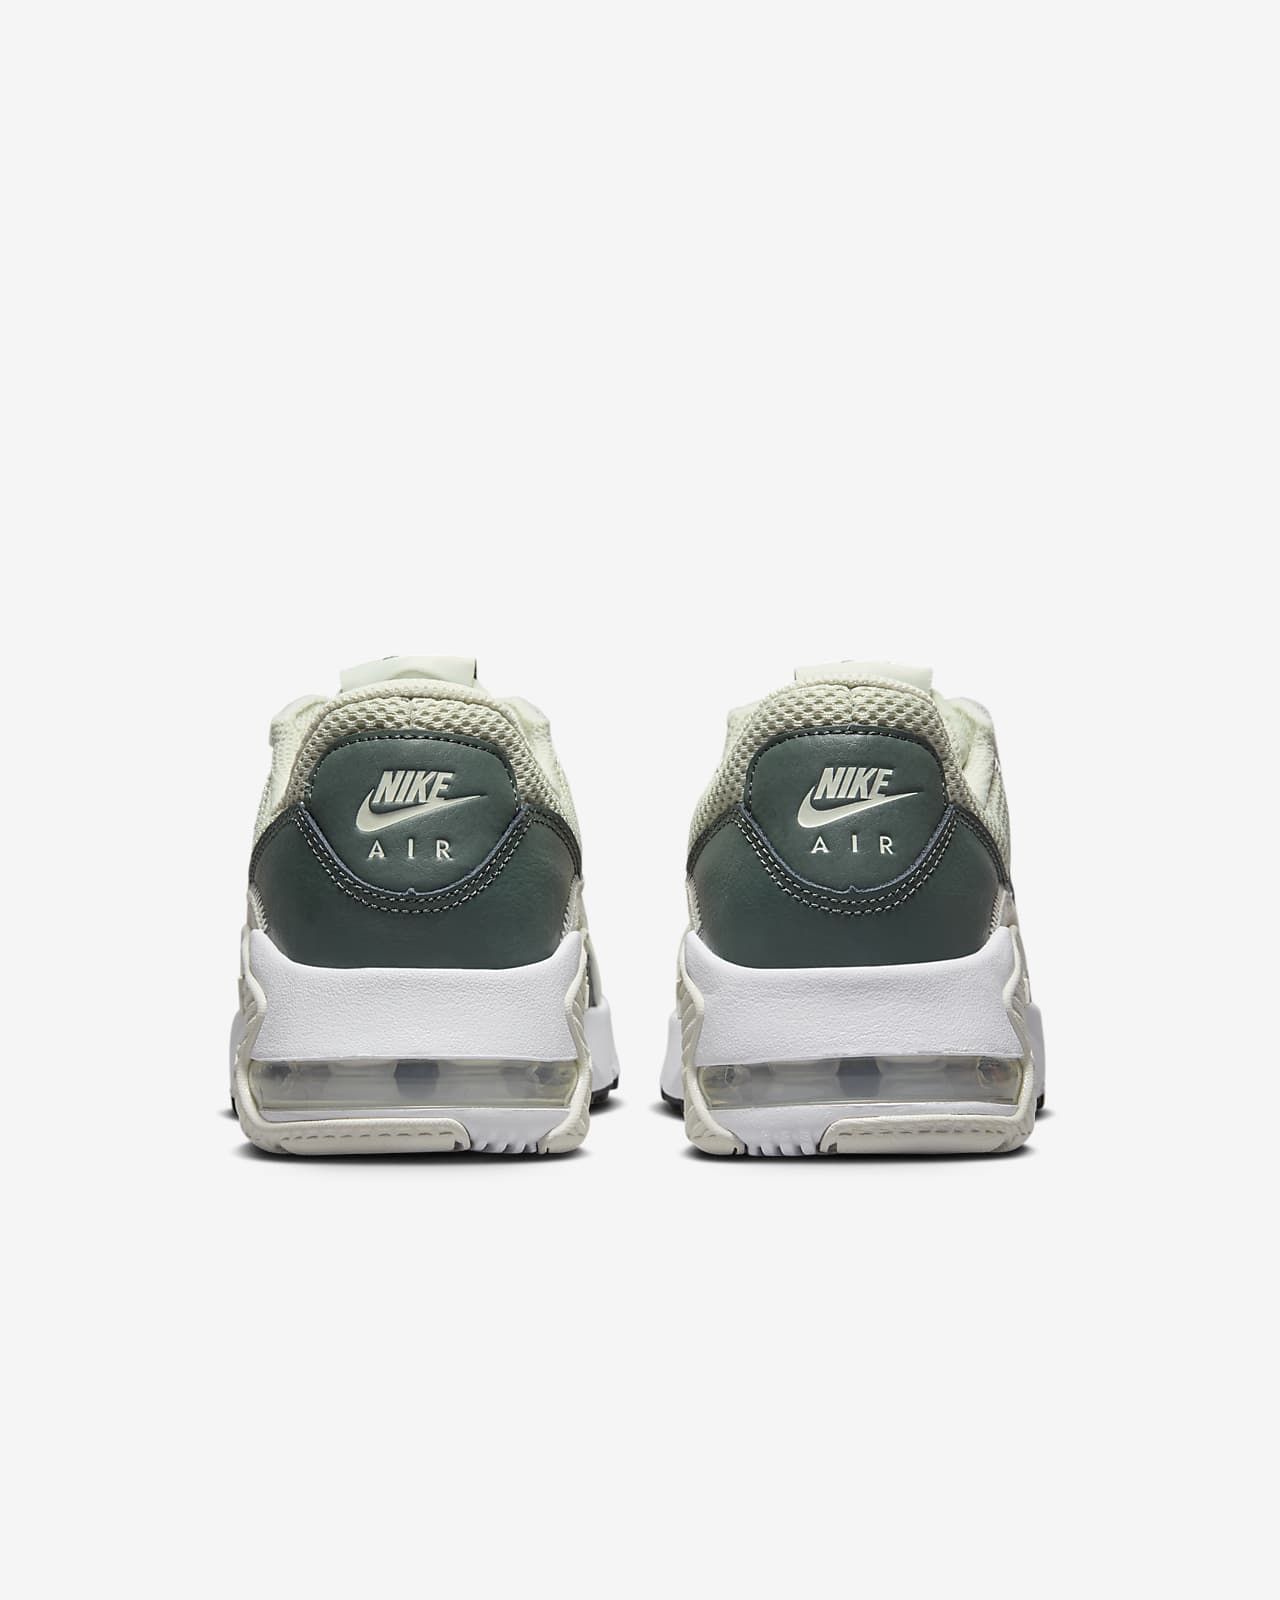 Sapatilhas Nike Air Max Excee Women s Shoes 